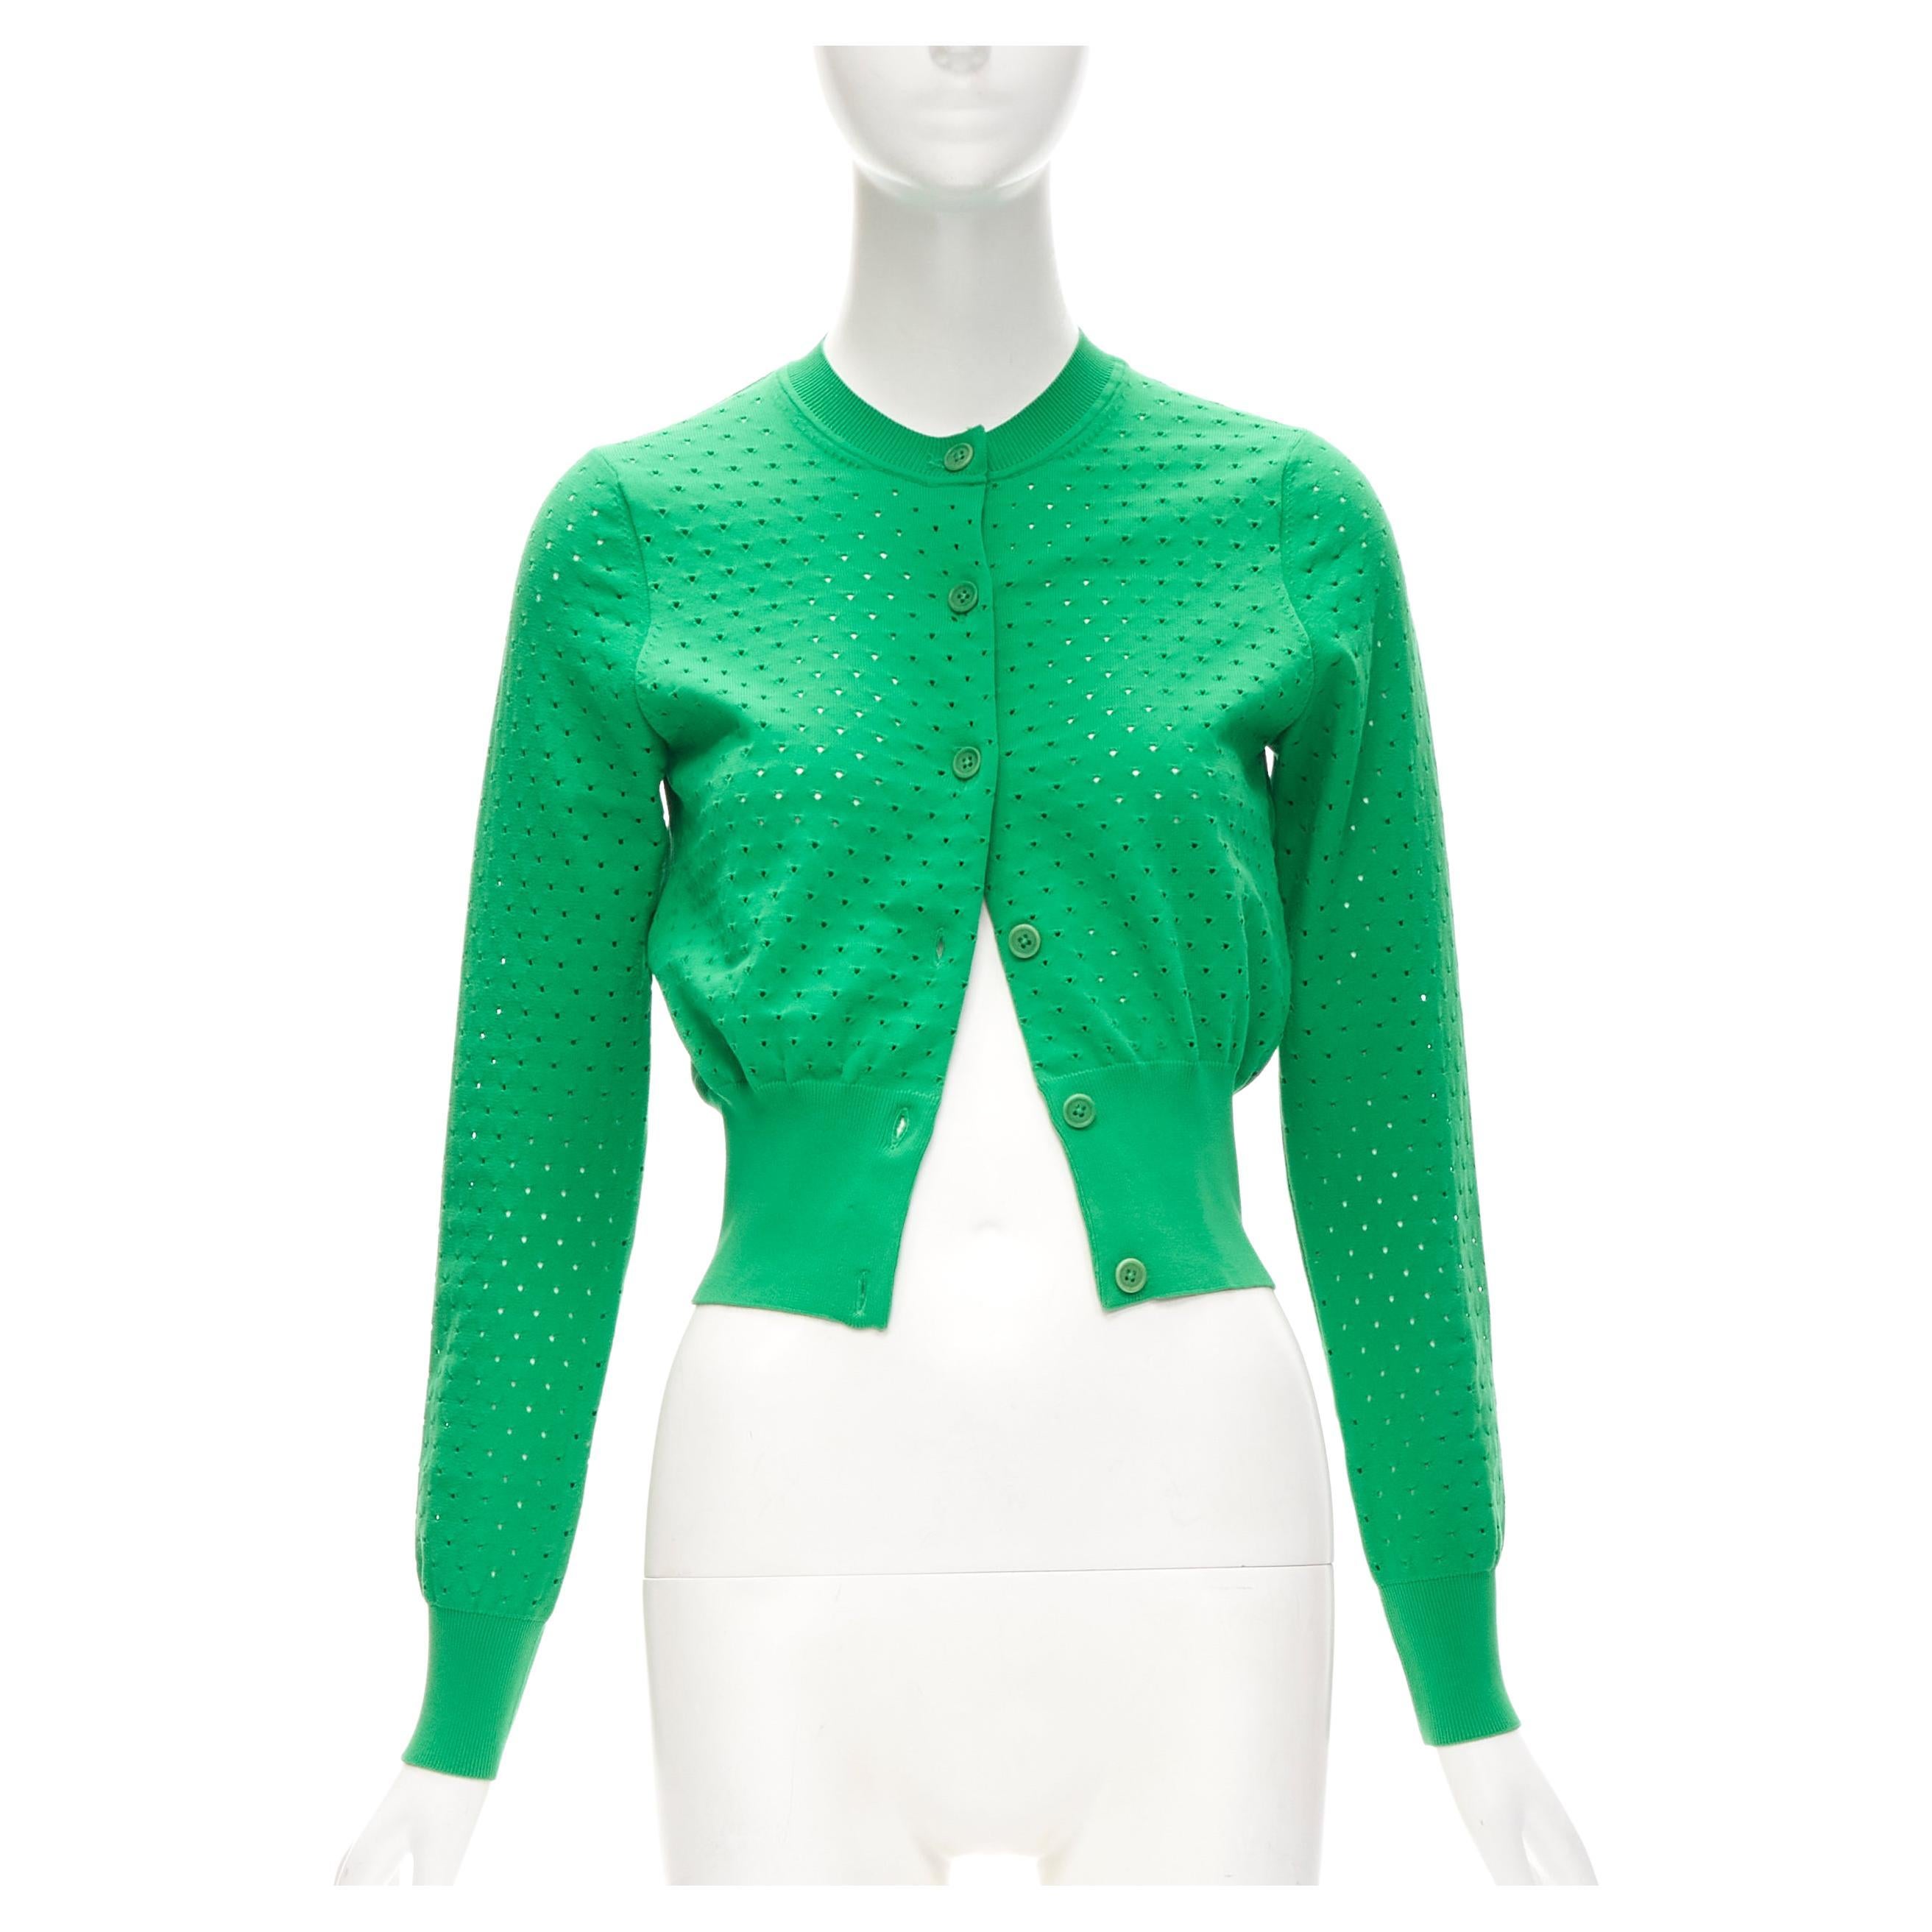 ACNE STUDIOS kelly green perforated cropped cardigan sweater S